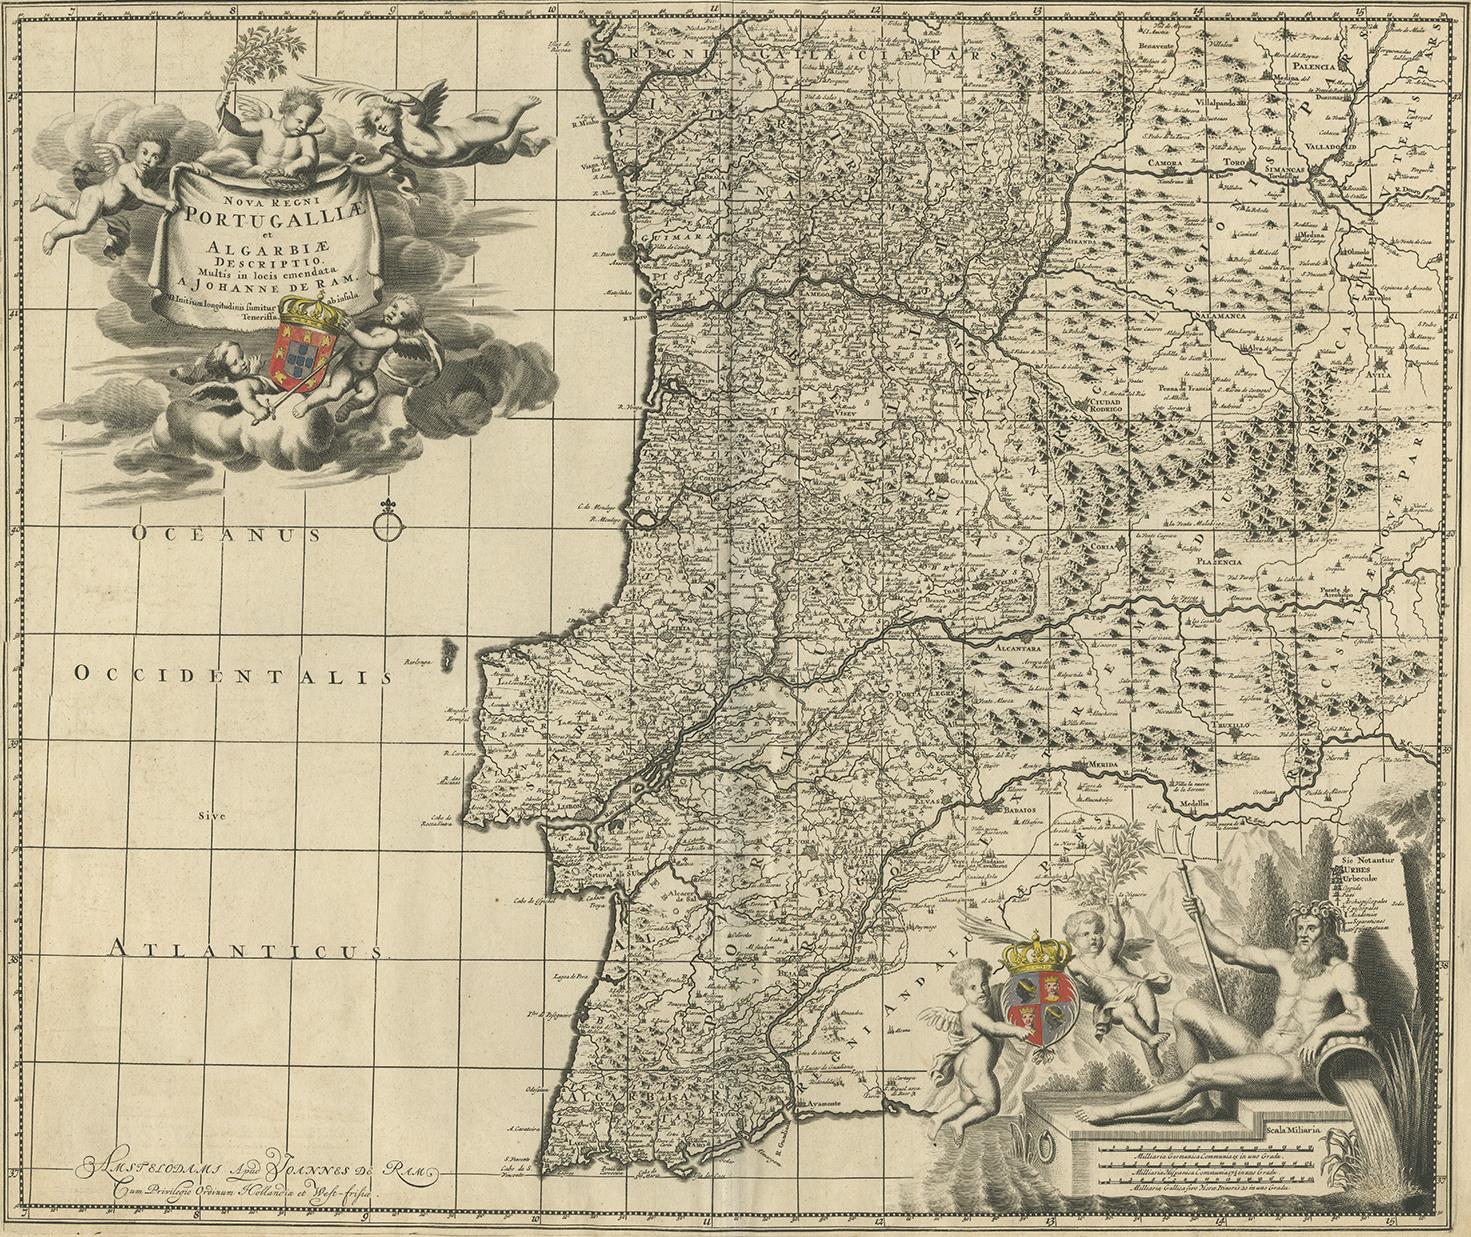 A detailed map of Portugal. Embellished with beautiful cartouche, sailing vessels and many putti. Very rare edition by J. de Ram, circa 1680.